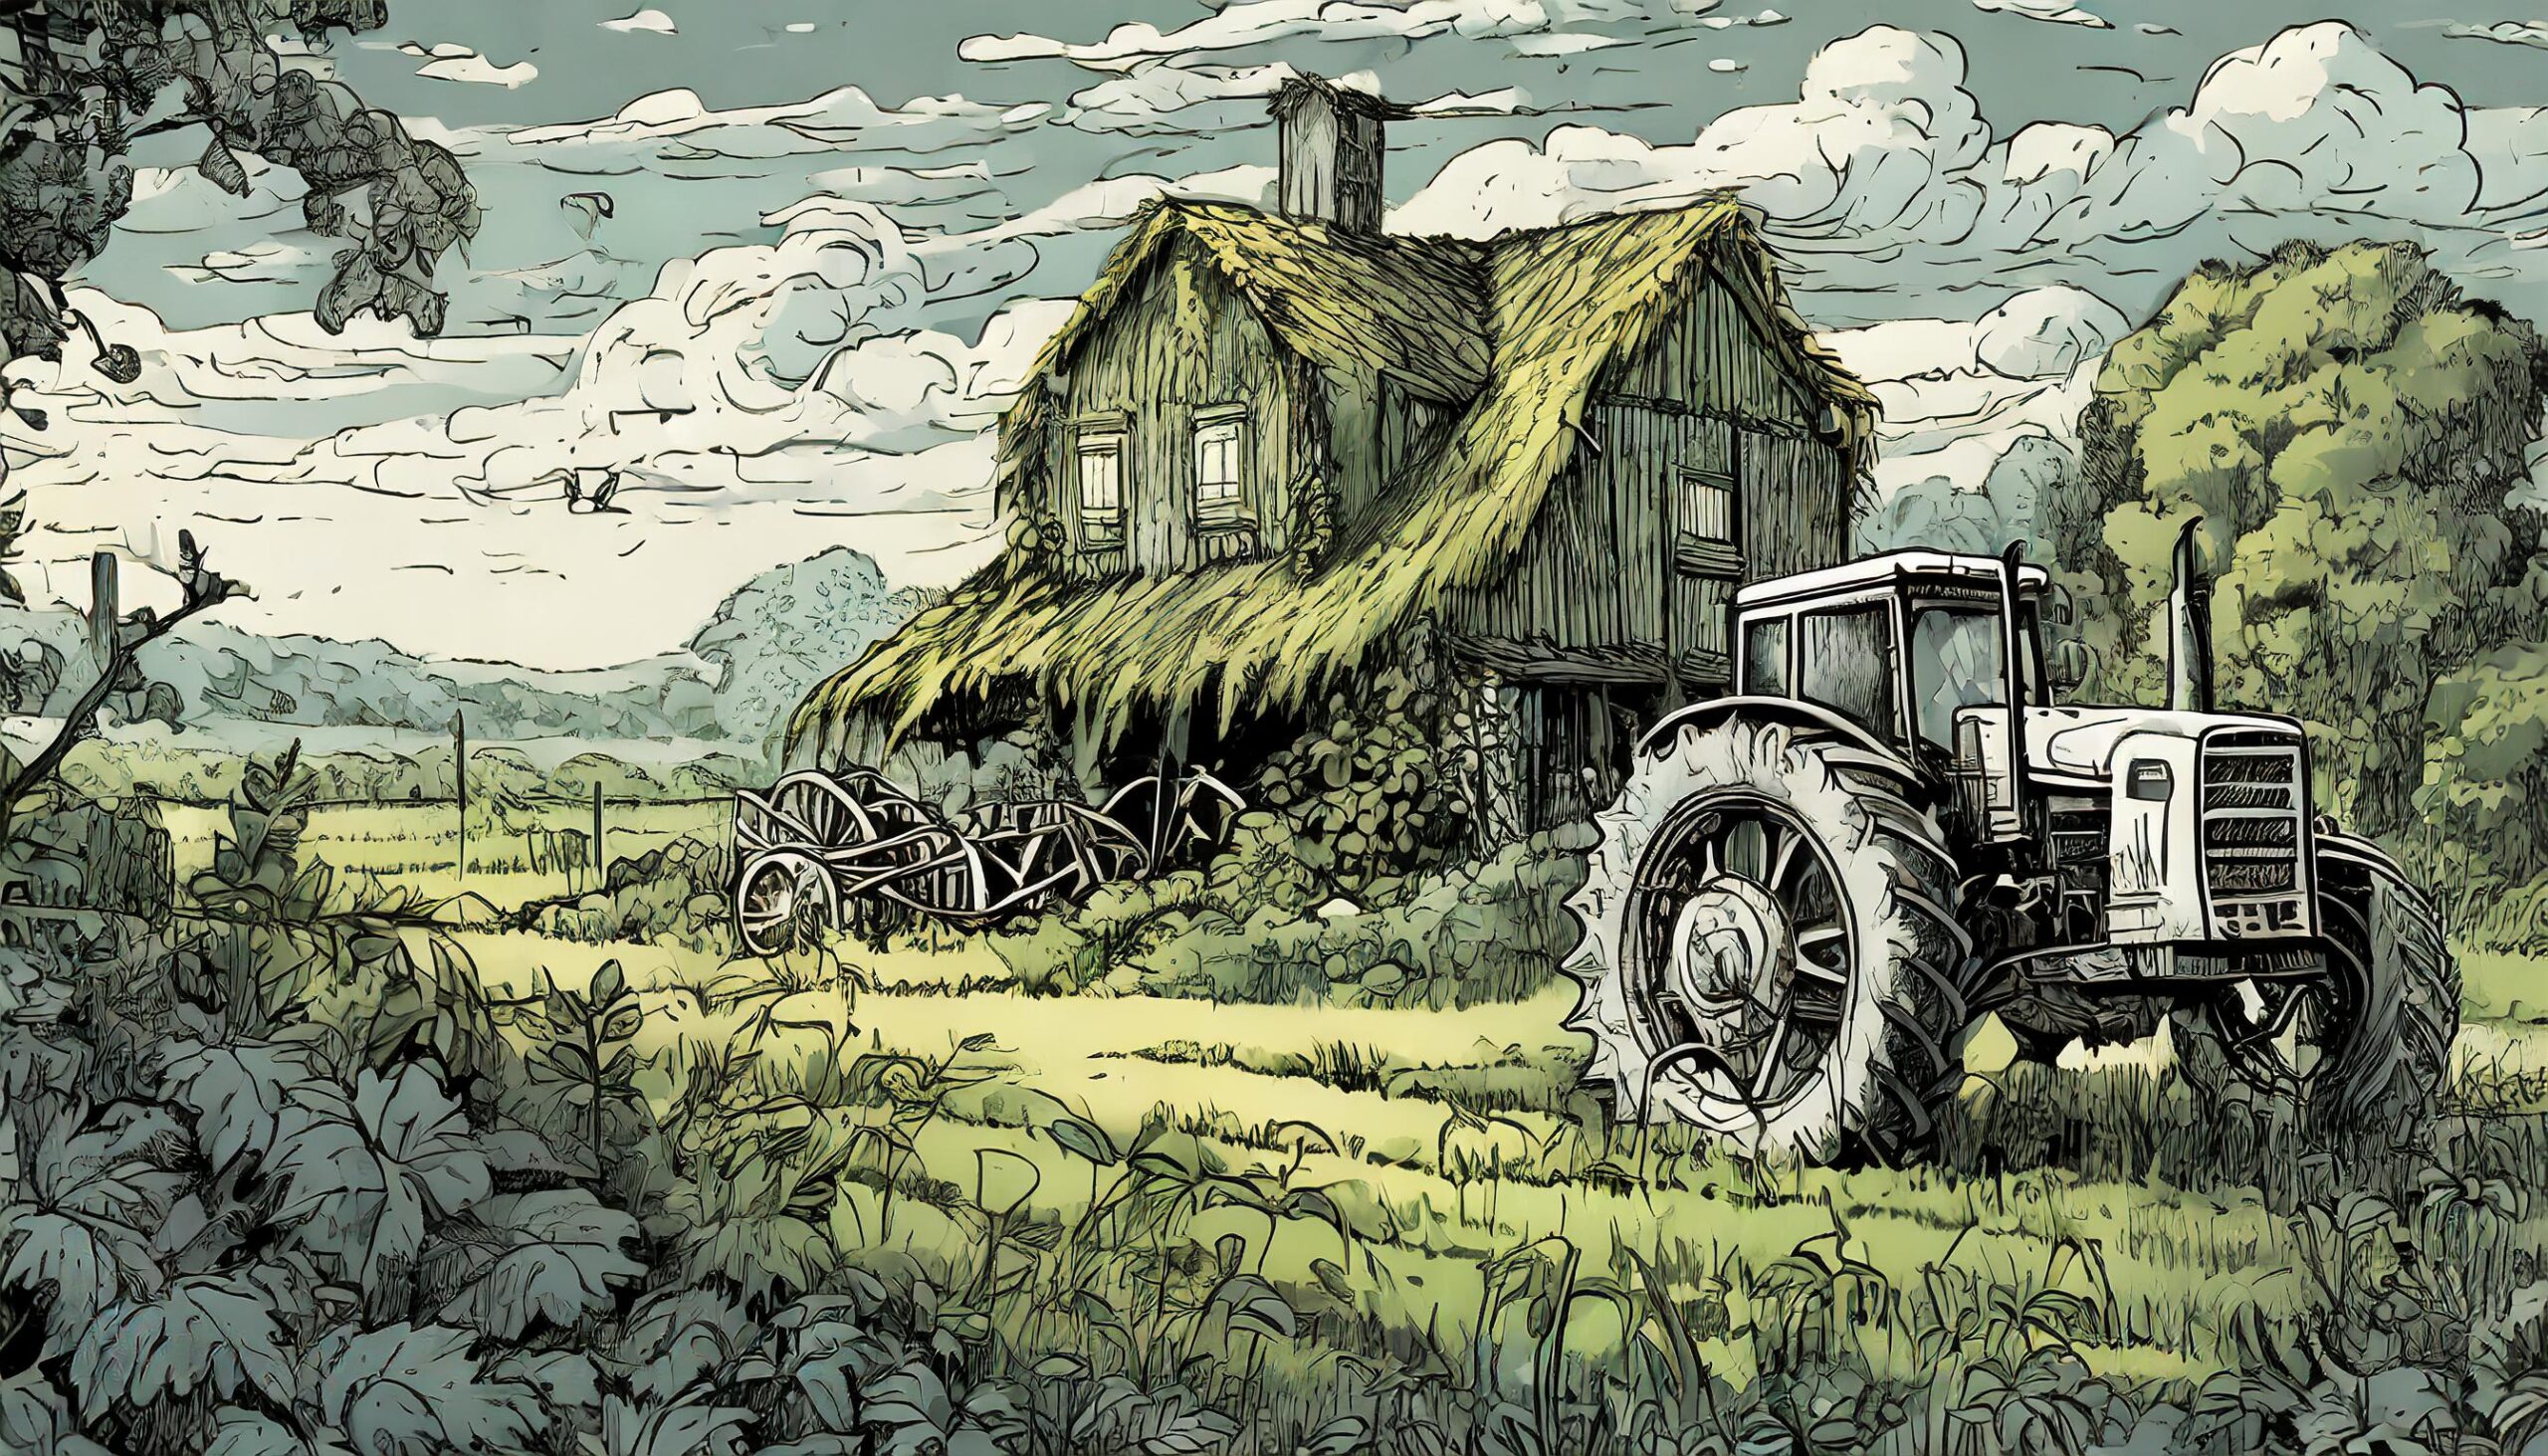 An overgrown farm with a tractor on the right side, etching style